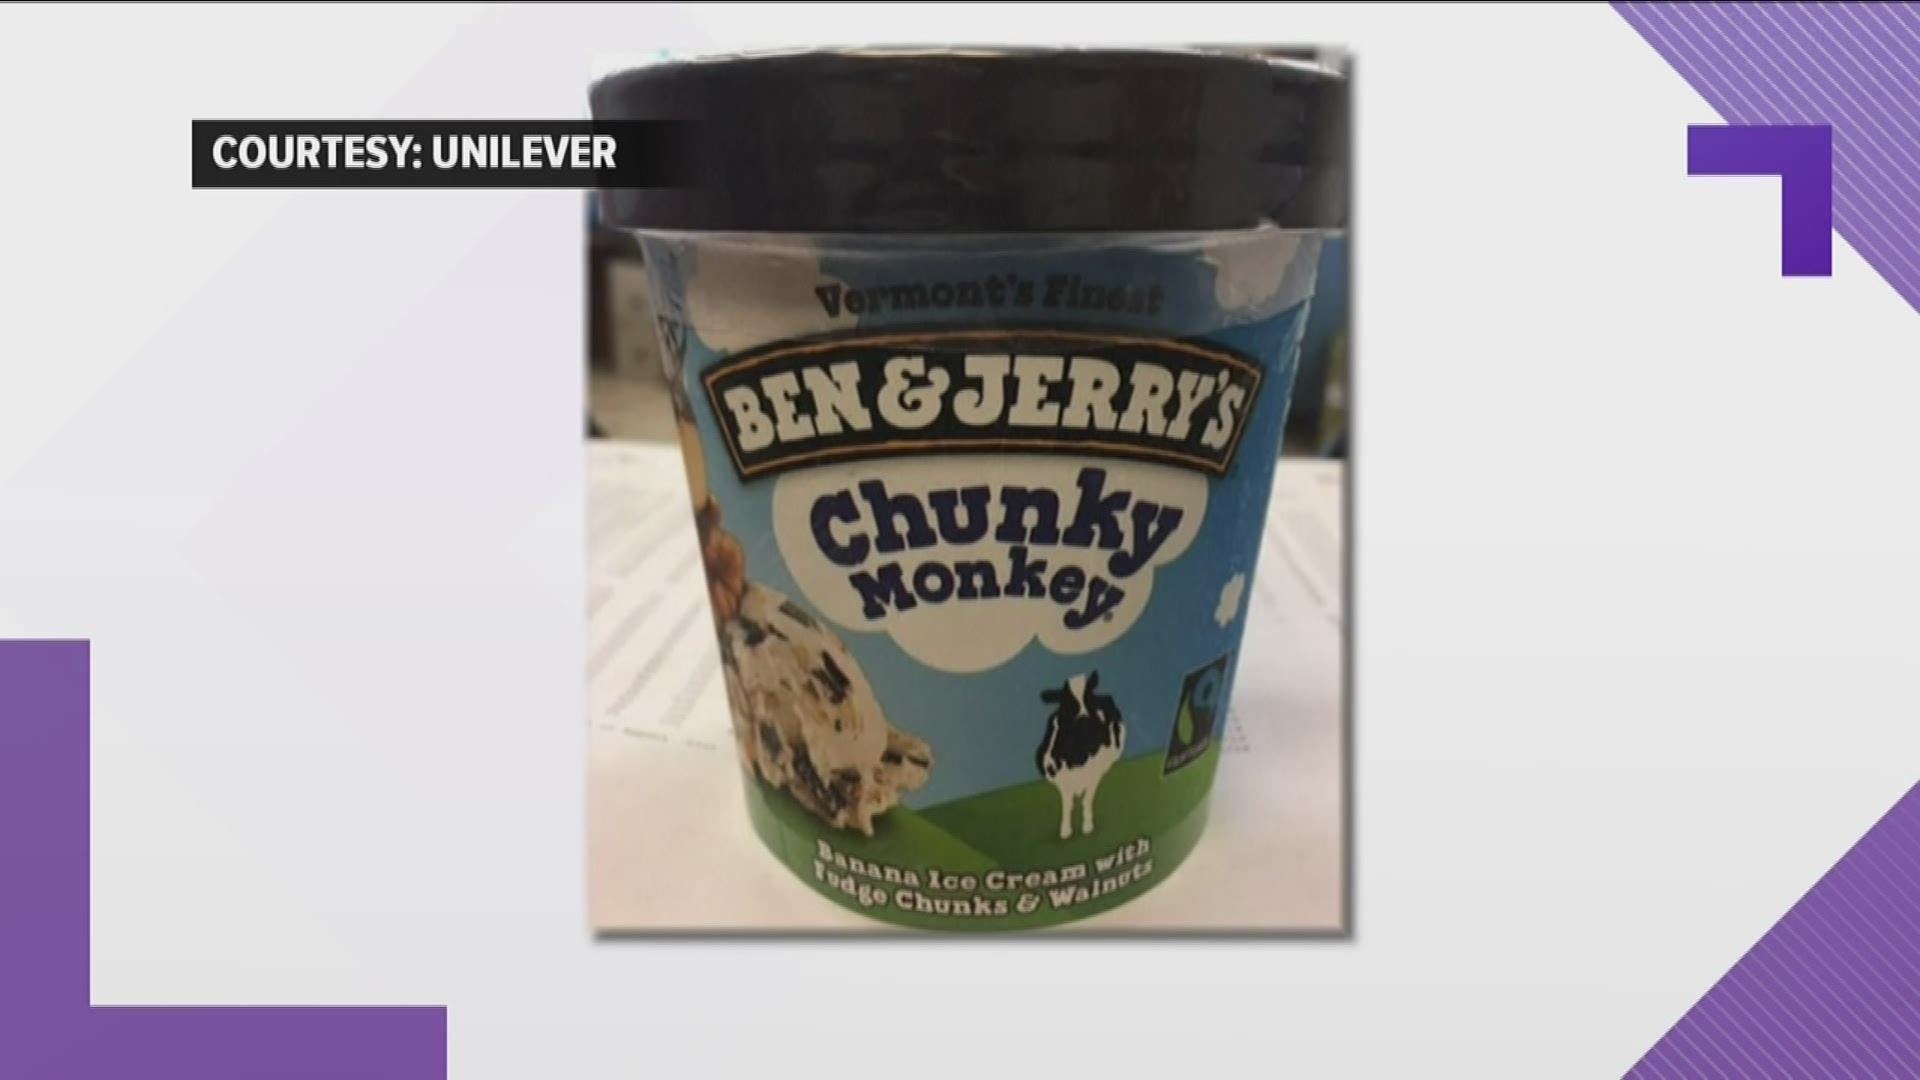 The affected Ben & Jerry's products may contain tree nuts that weren't on the ingredient list or allergy info list.